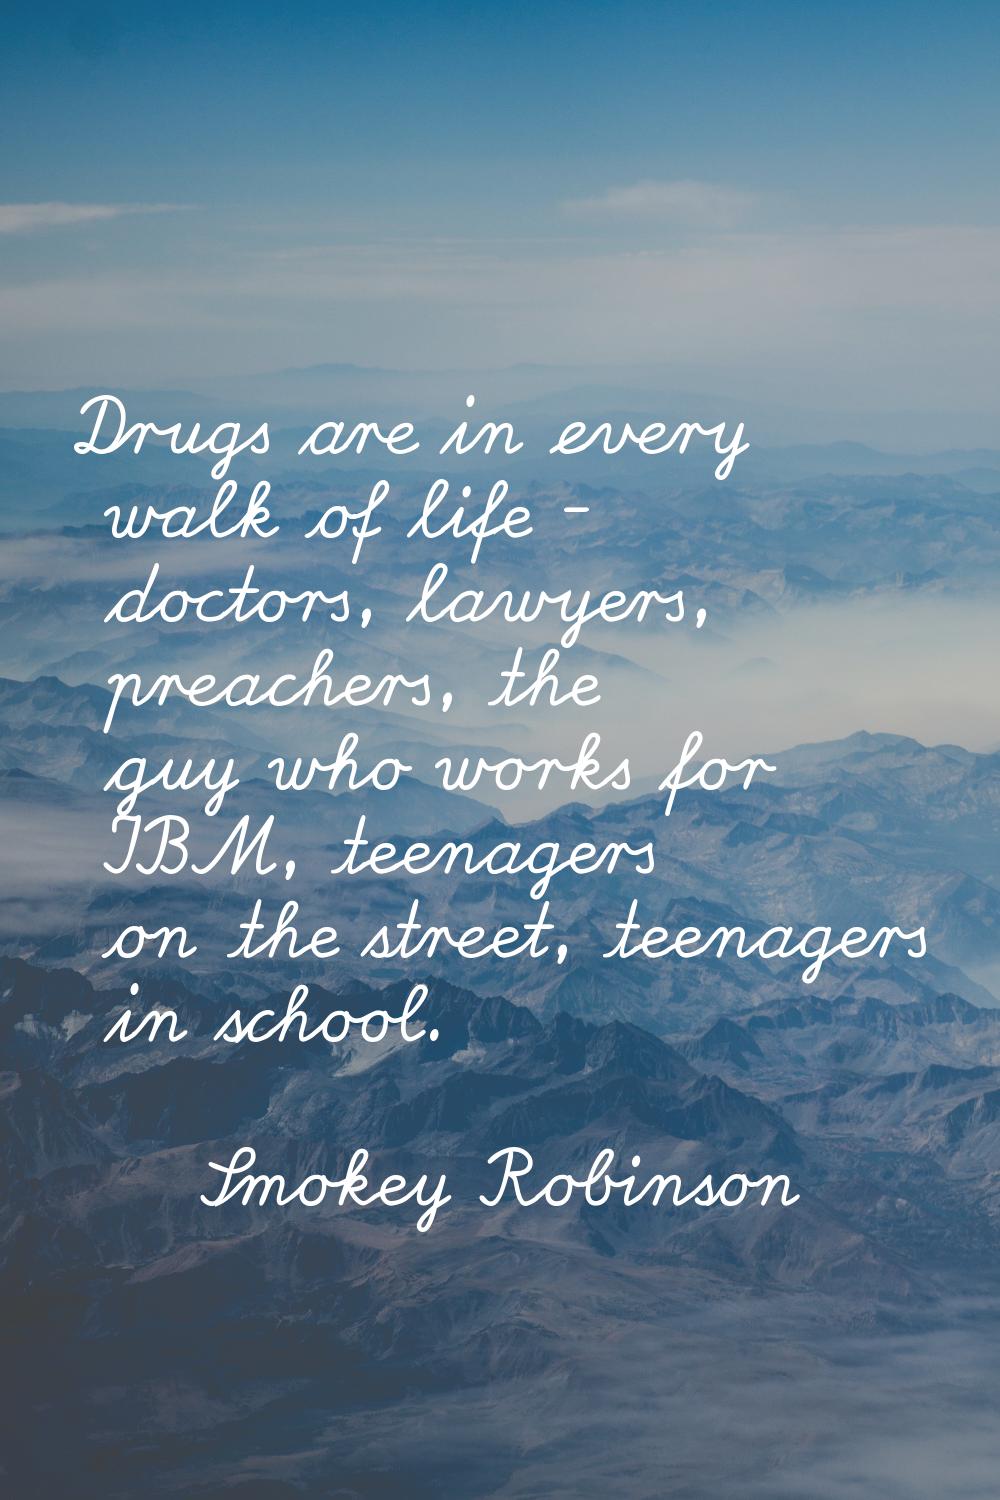 Drugs are in every walk of life - doctors, lawyers, preachers, the guy who works for IBM, teenagers